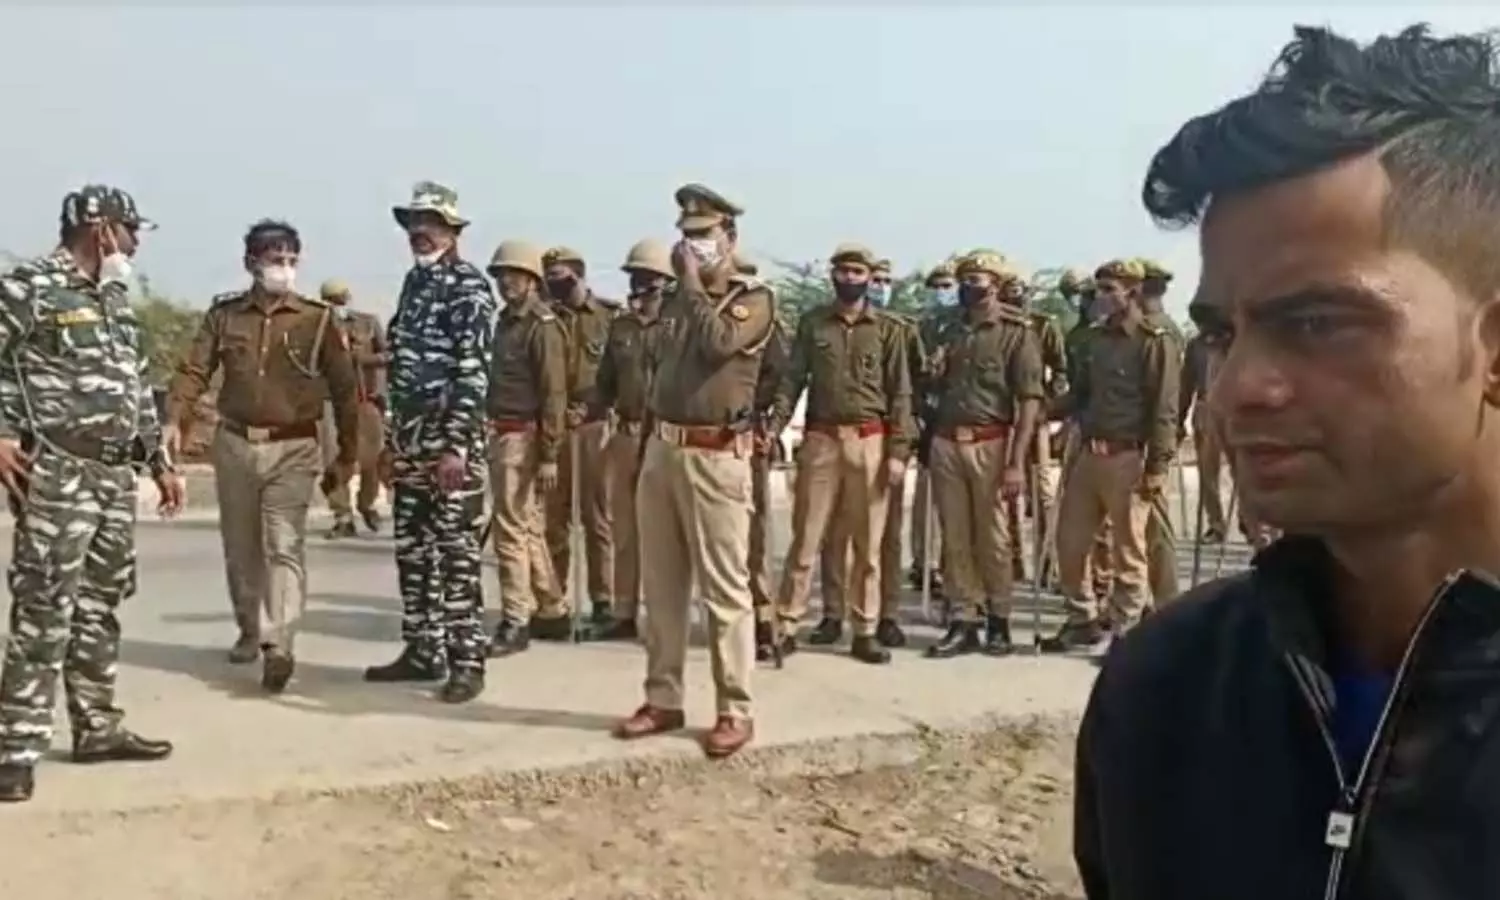 Jalaun News: Police did flag march with paramilitary in rural areas, appealed to vote fearlessly